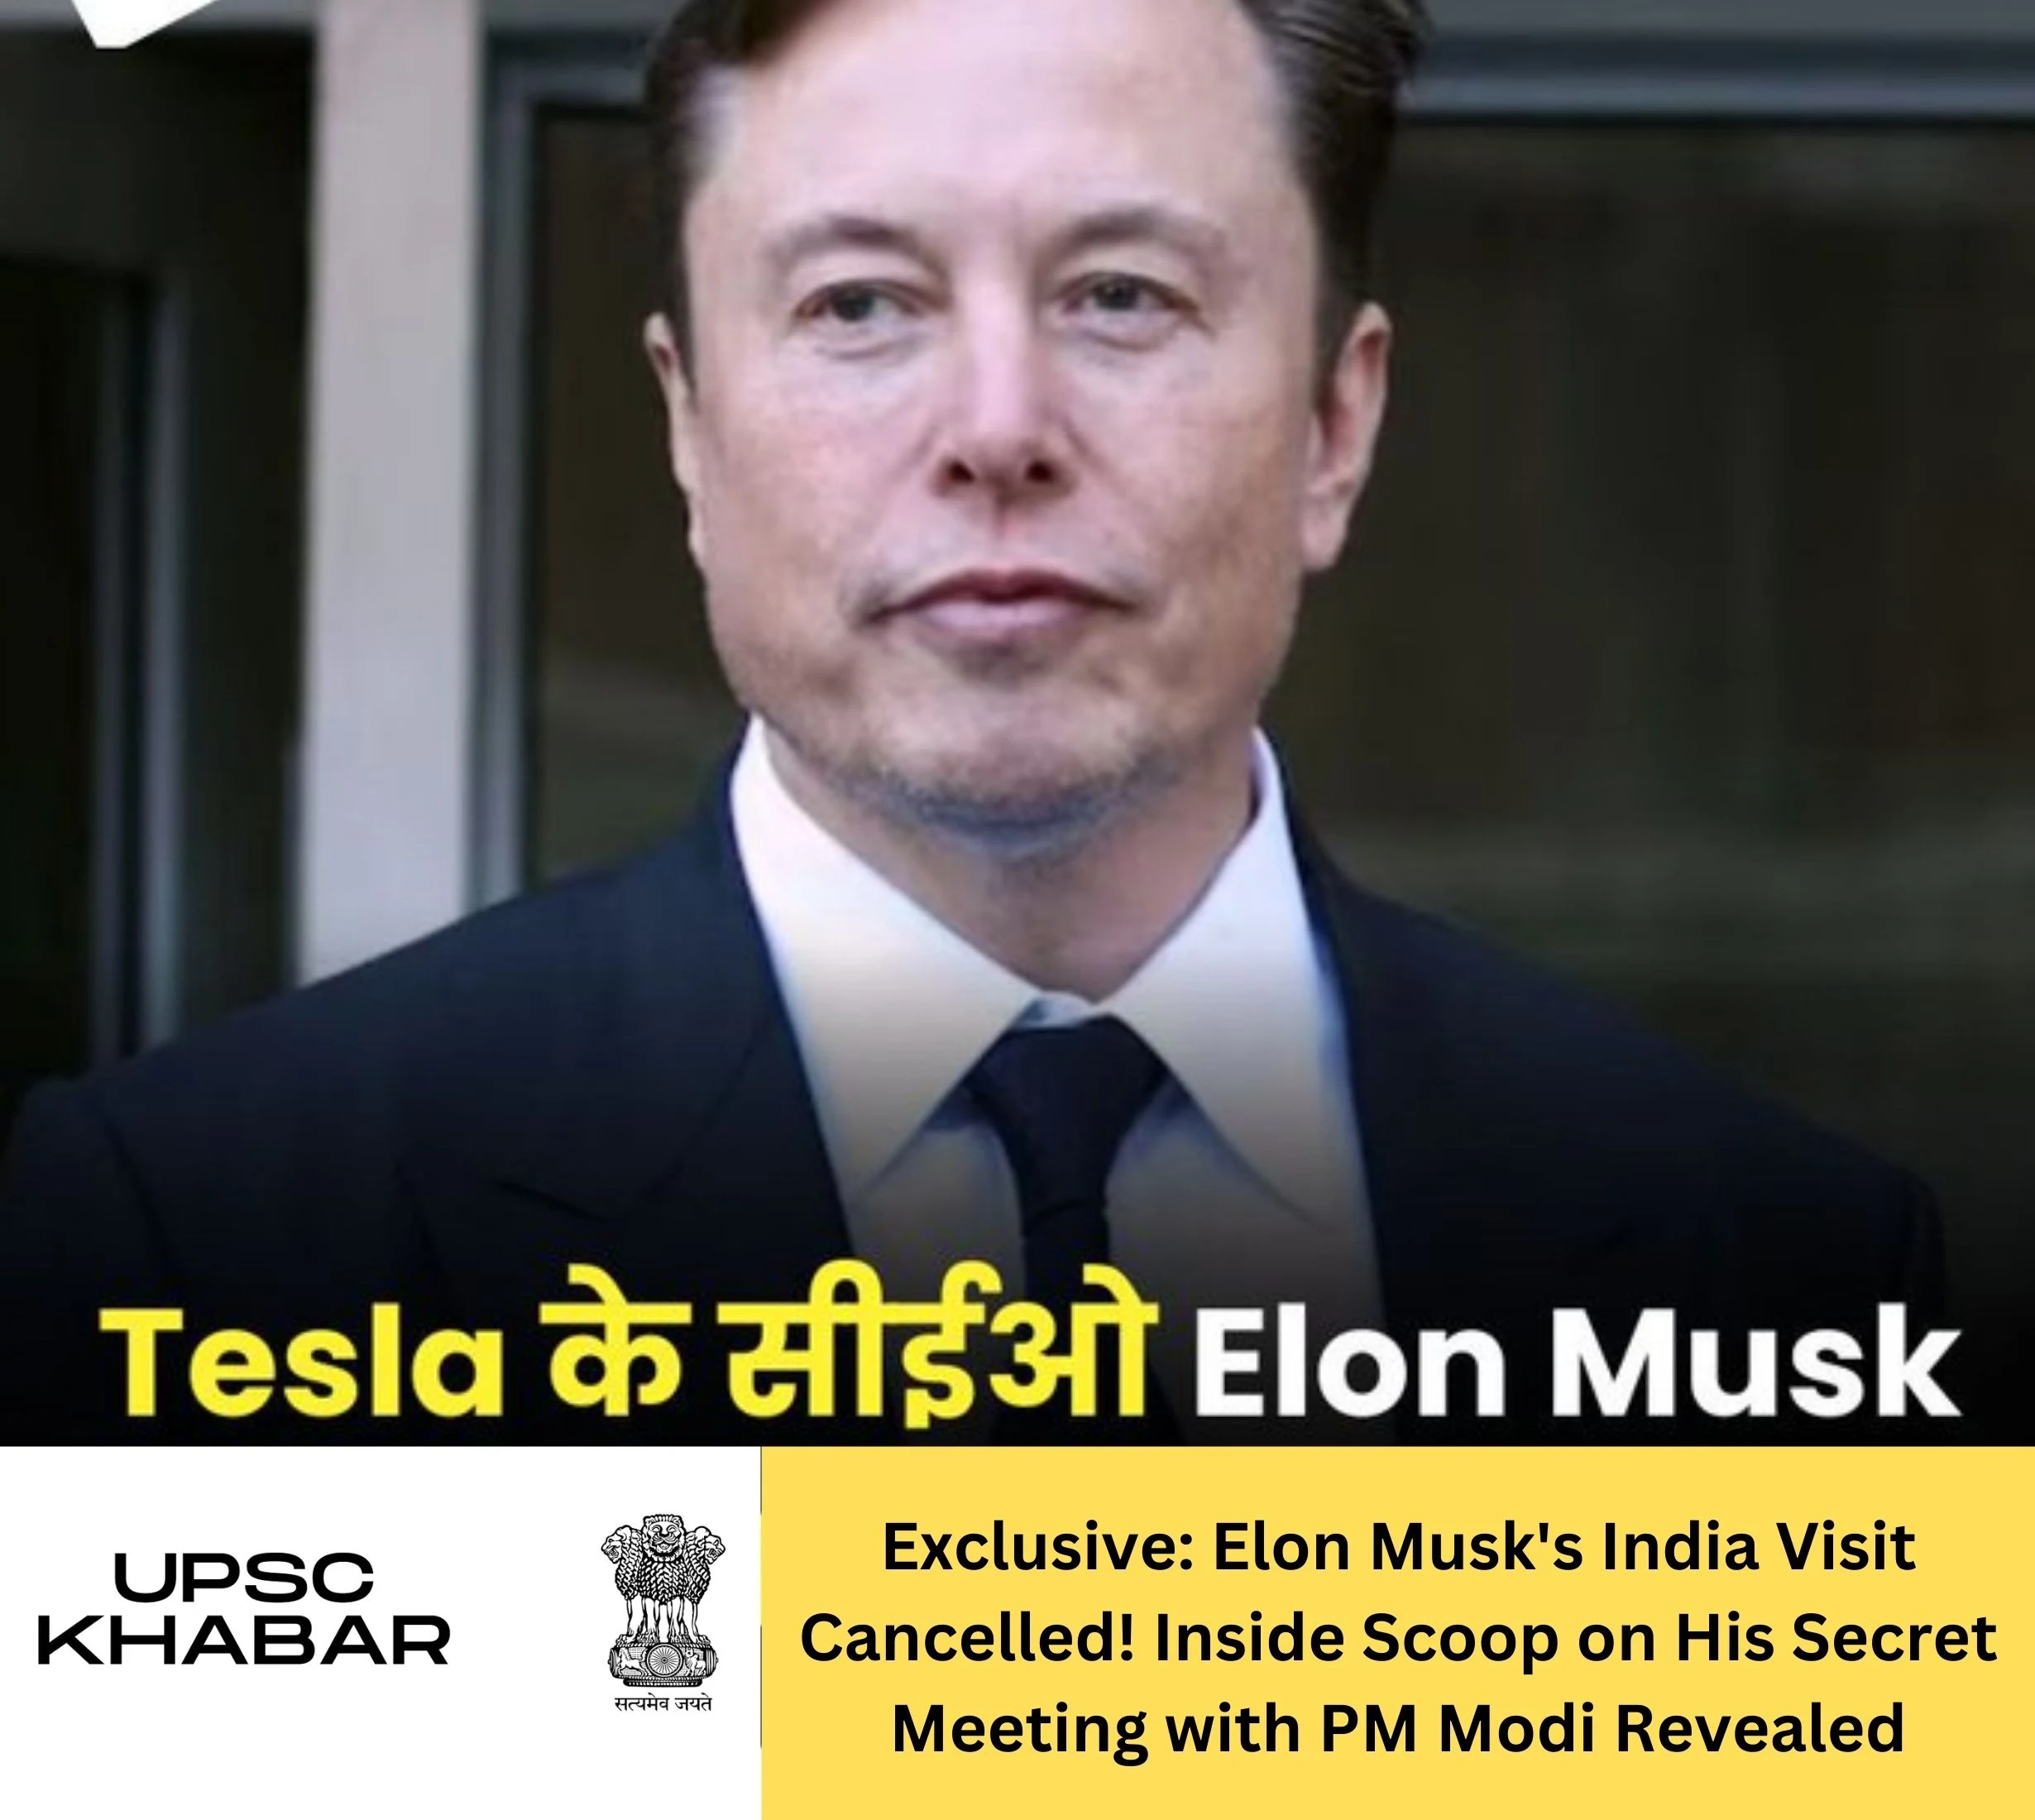 Exclusive: Elon Musk's India Visit Cancelled! Inside Scoop on His Secret Meeting with PM Modi Revealed